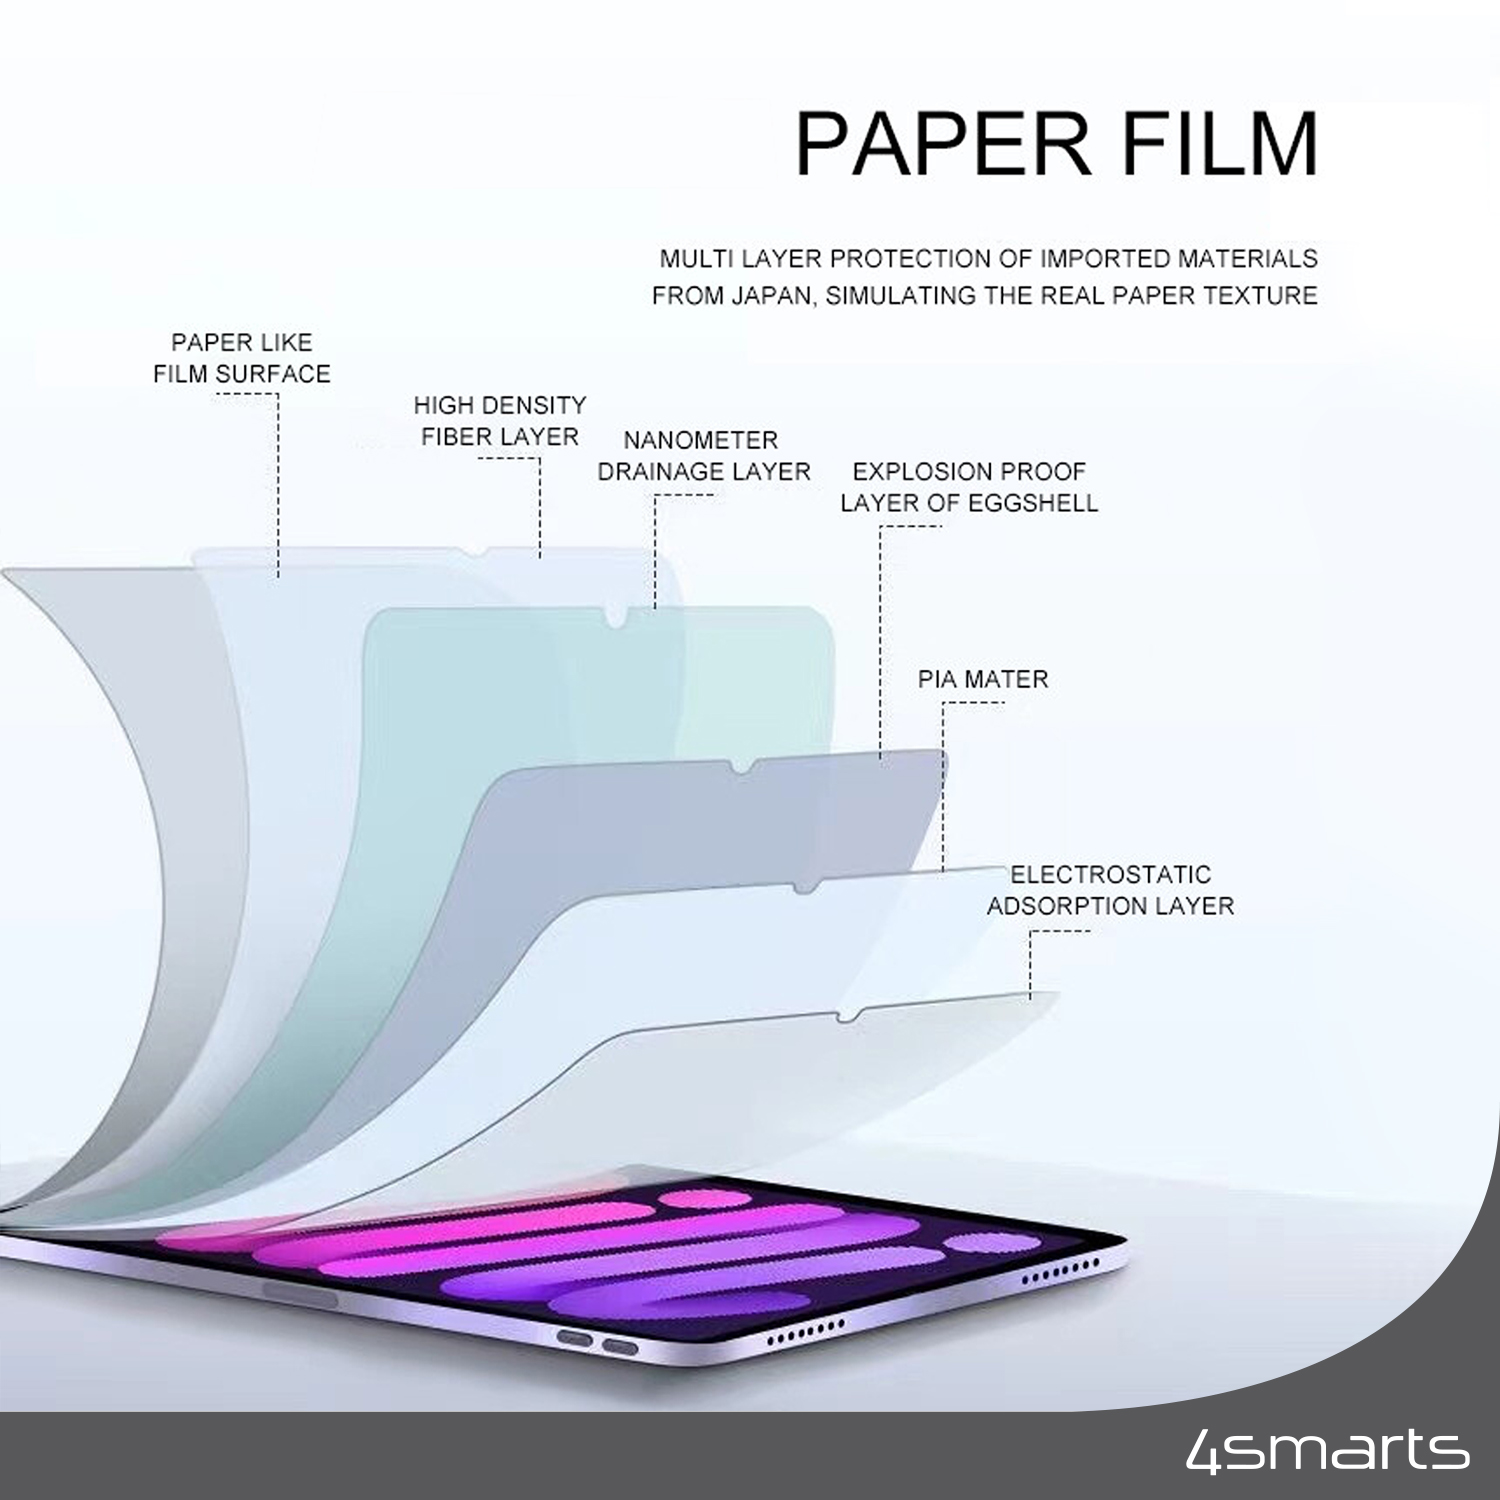 Paper like film surface for you iPad Pro 12.9 by 4smarts is long lasting.